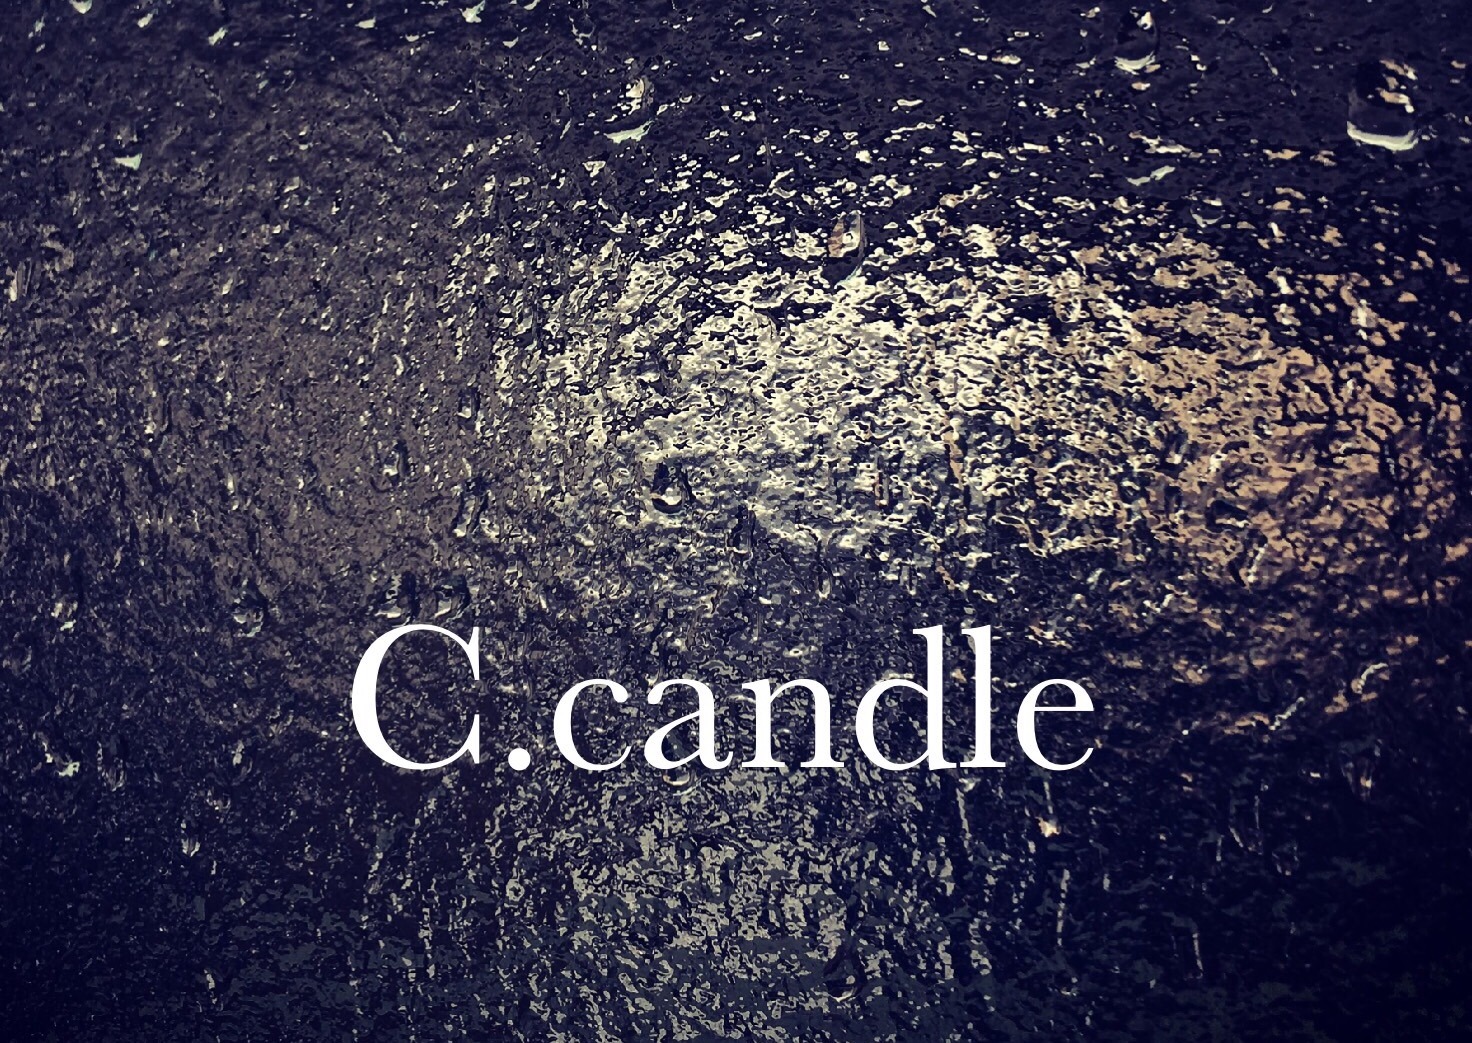 C.candle